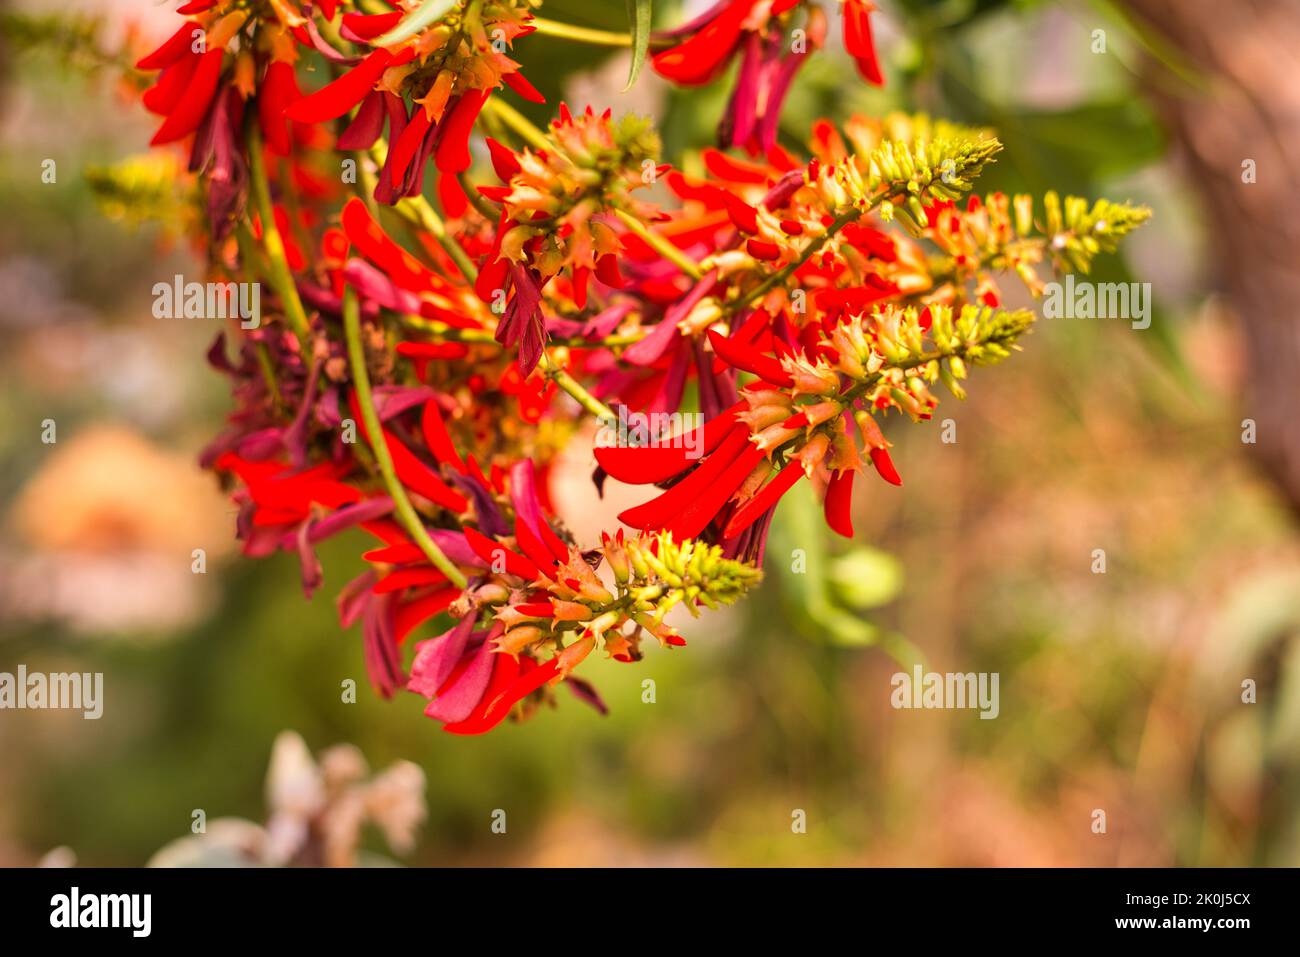 A red common coral-tree flowers in the sun Stock Photo